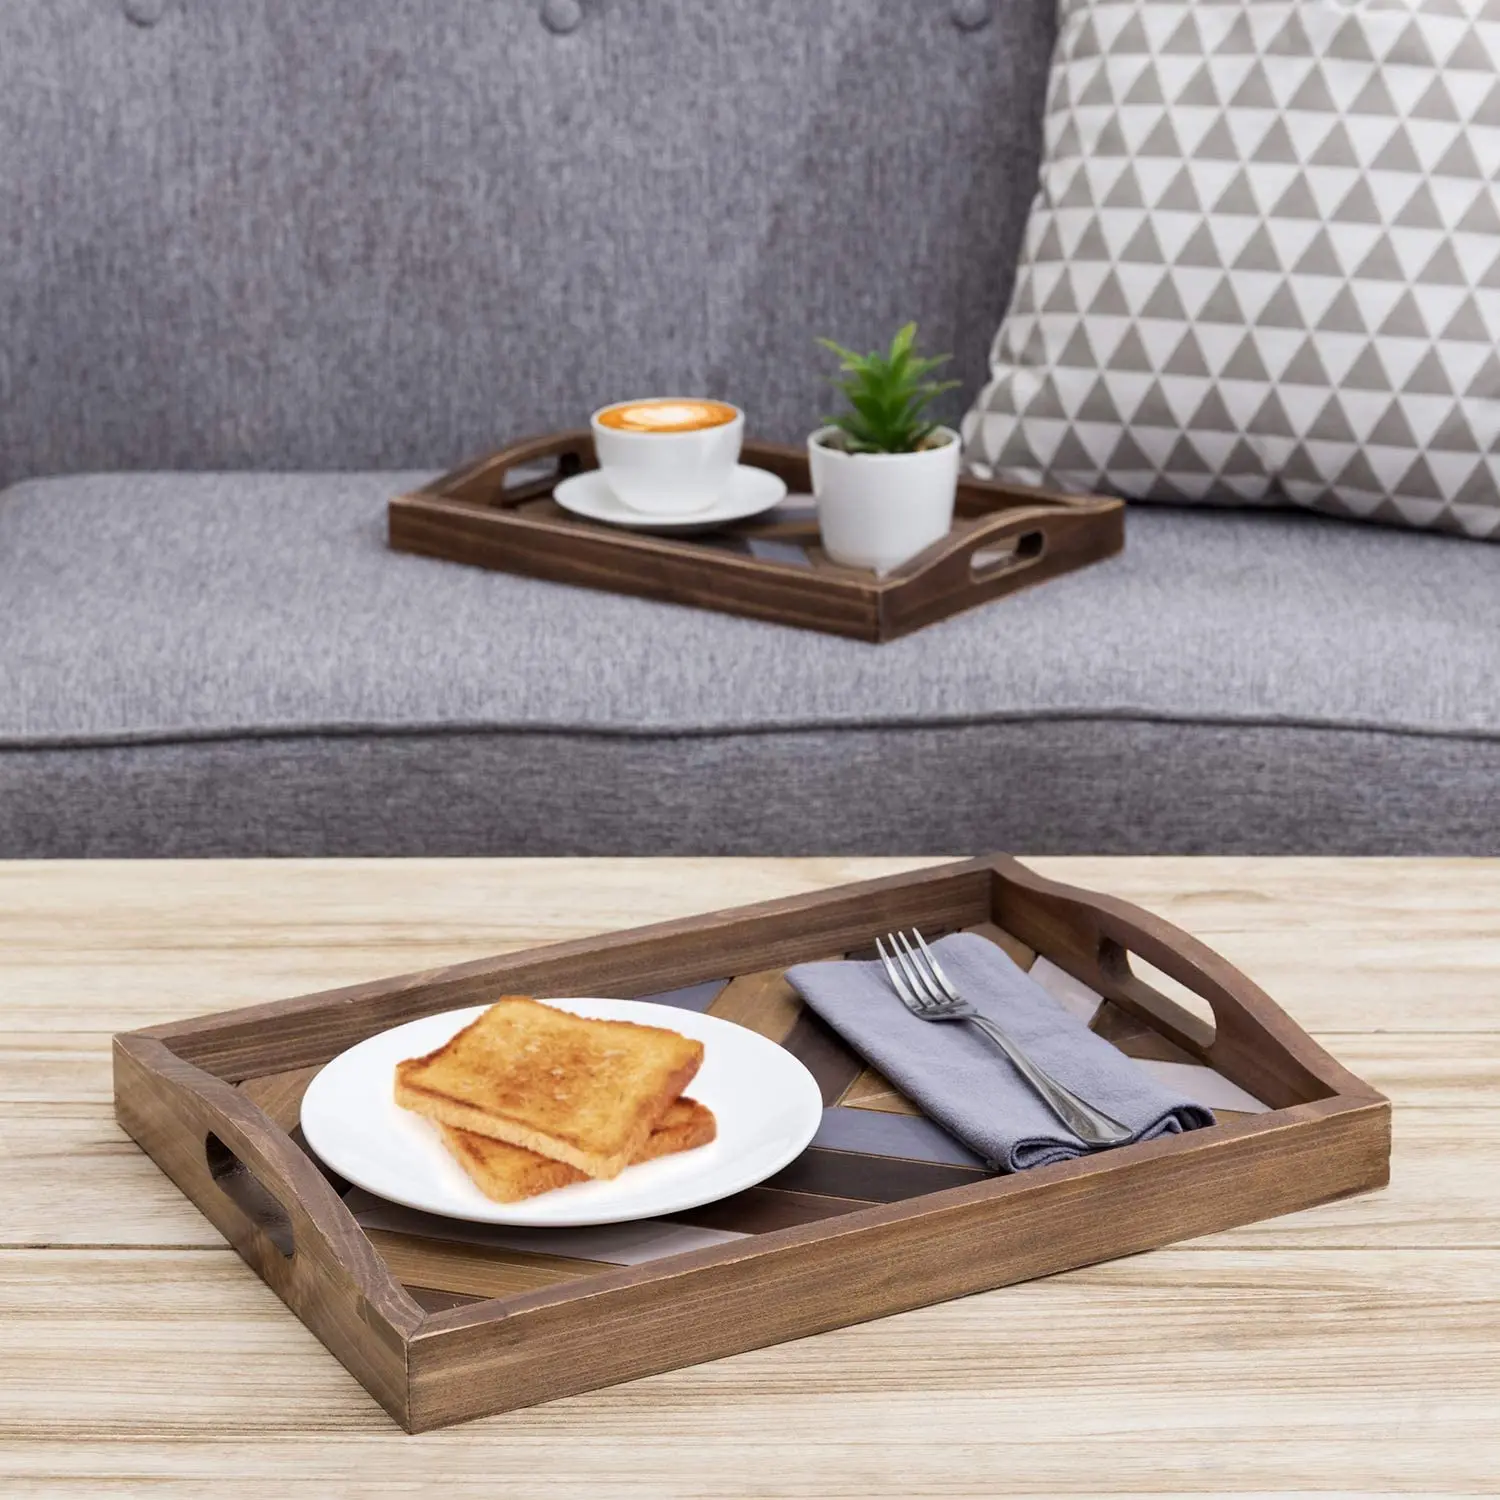 Rustic Chevron Pattern Rectangular Wood Breakfast Serving Tray With ...